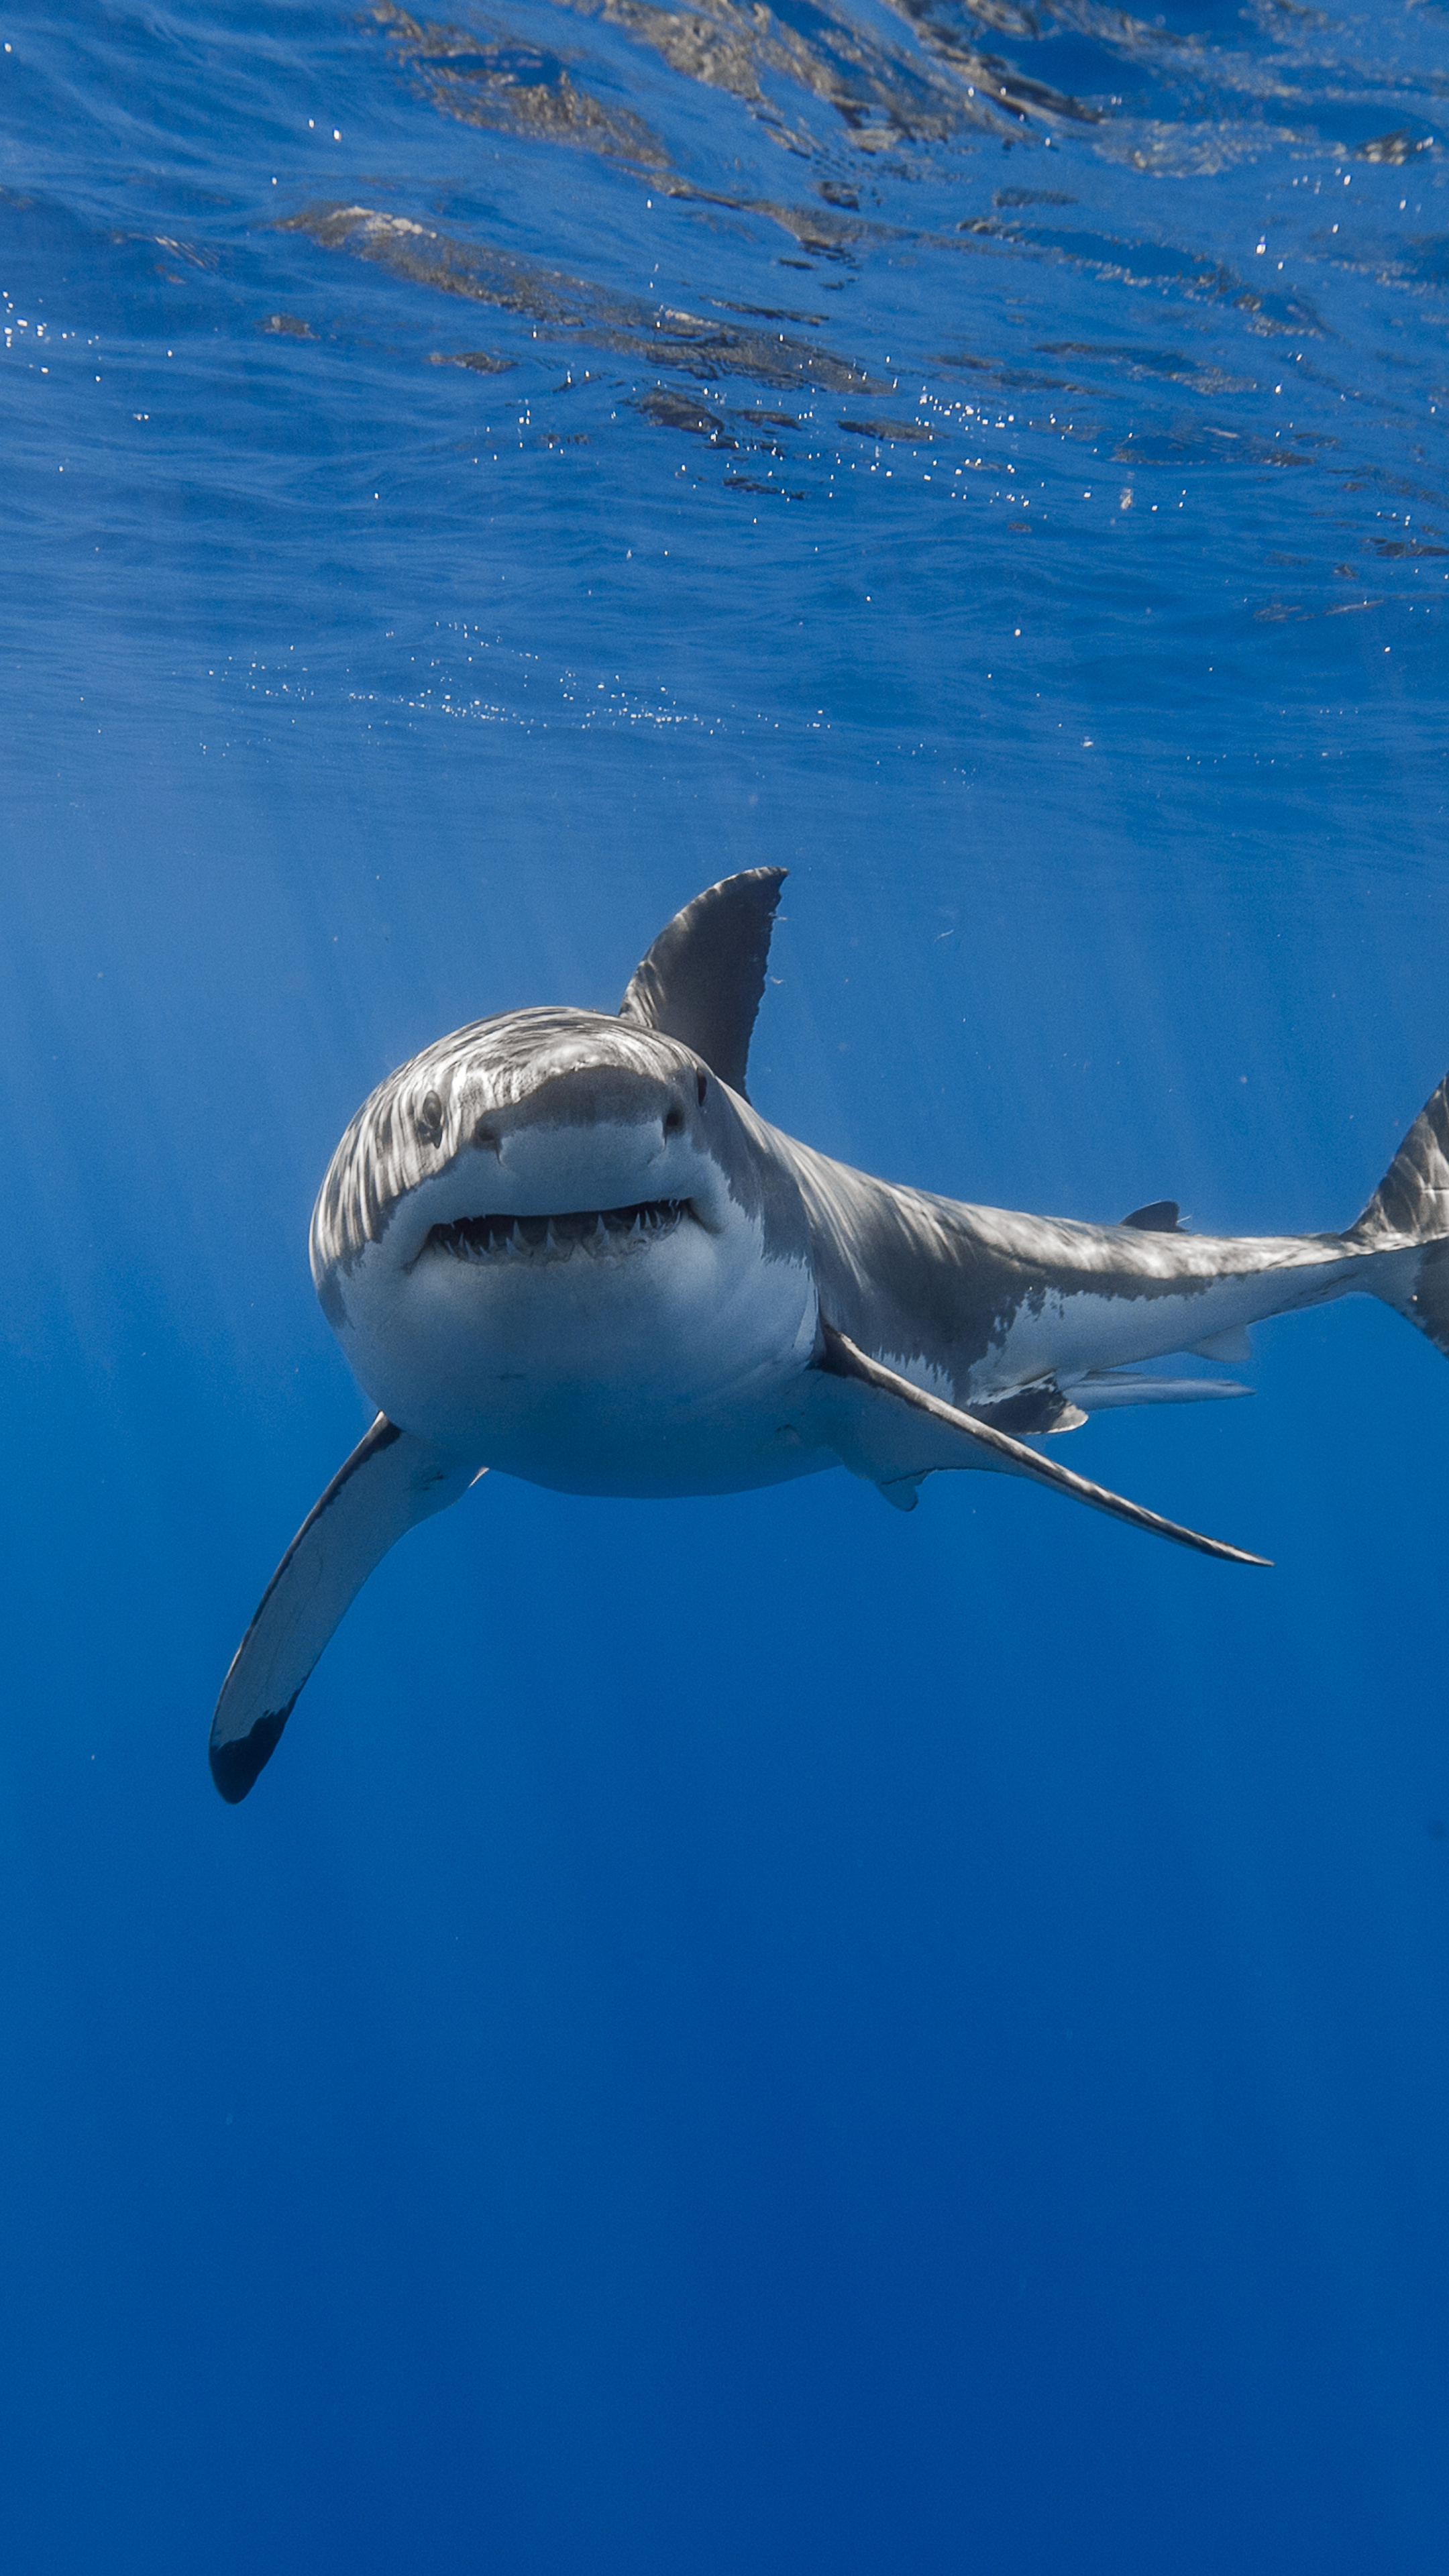 Shark wallpapers, Sony Xperia, High-definition images, Aquatic beauty, 2160x3840 4K Handy